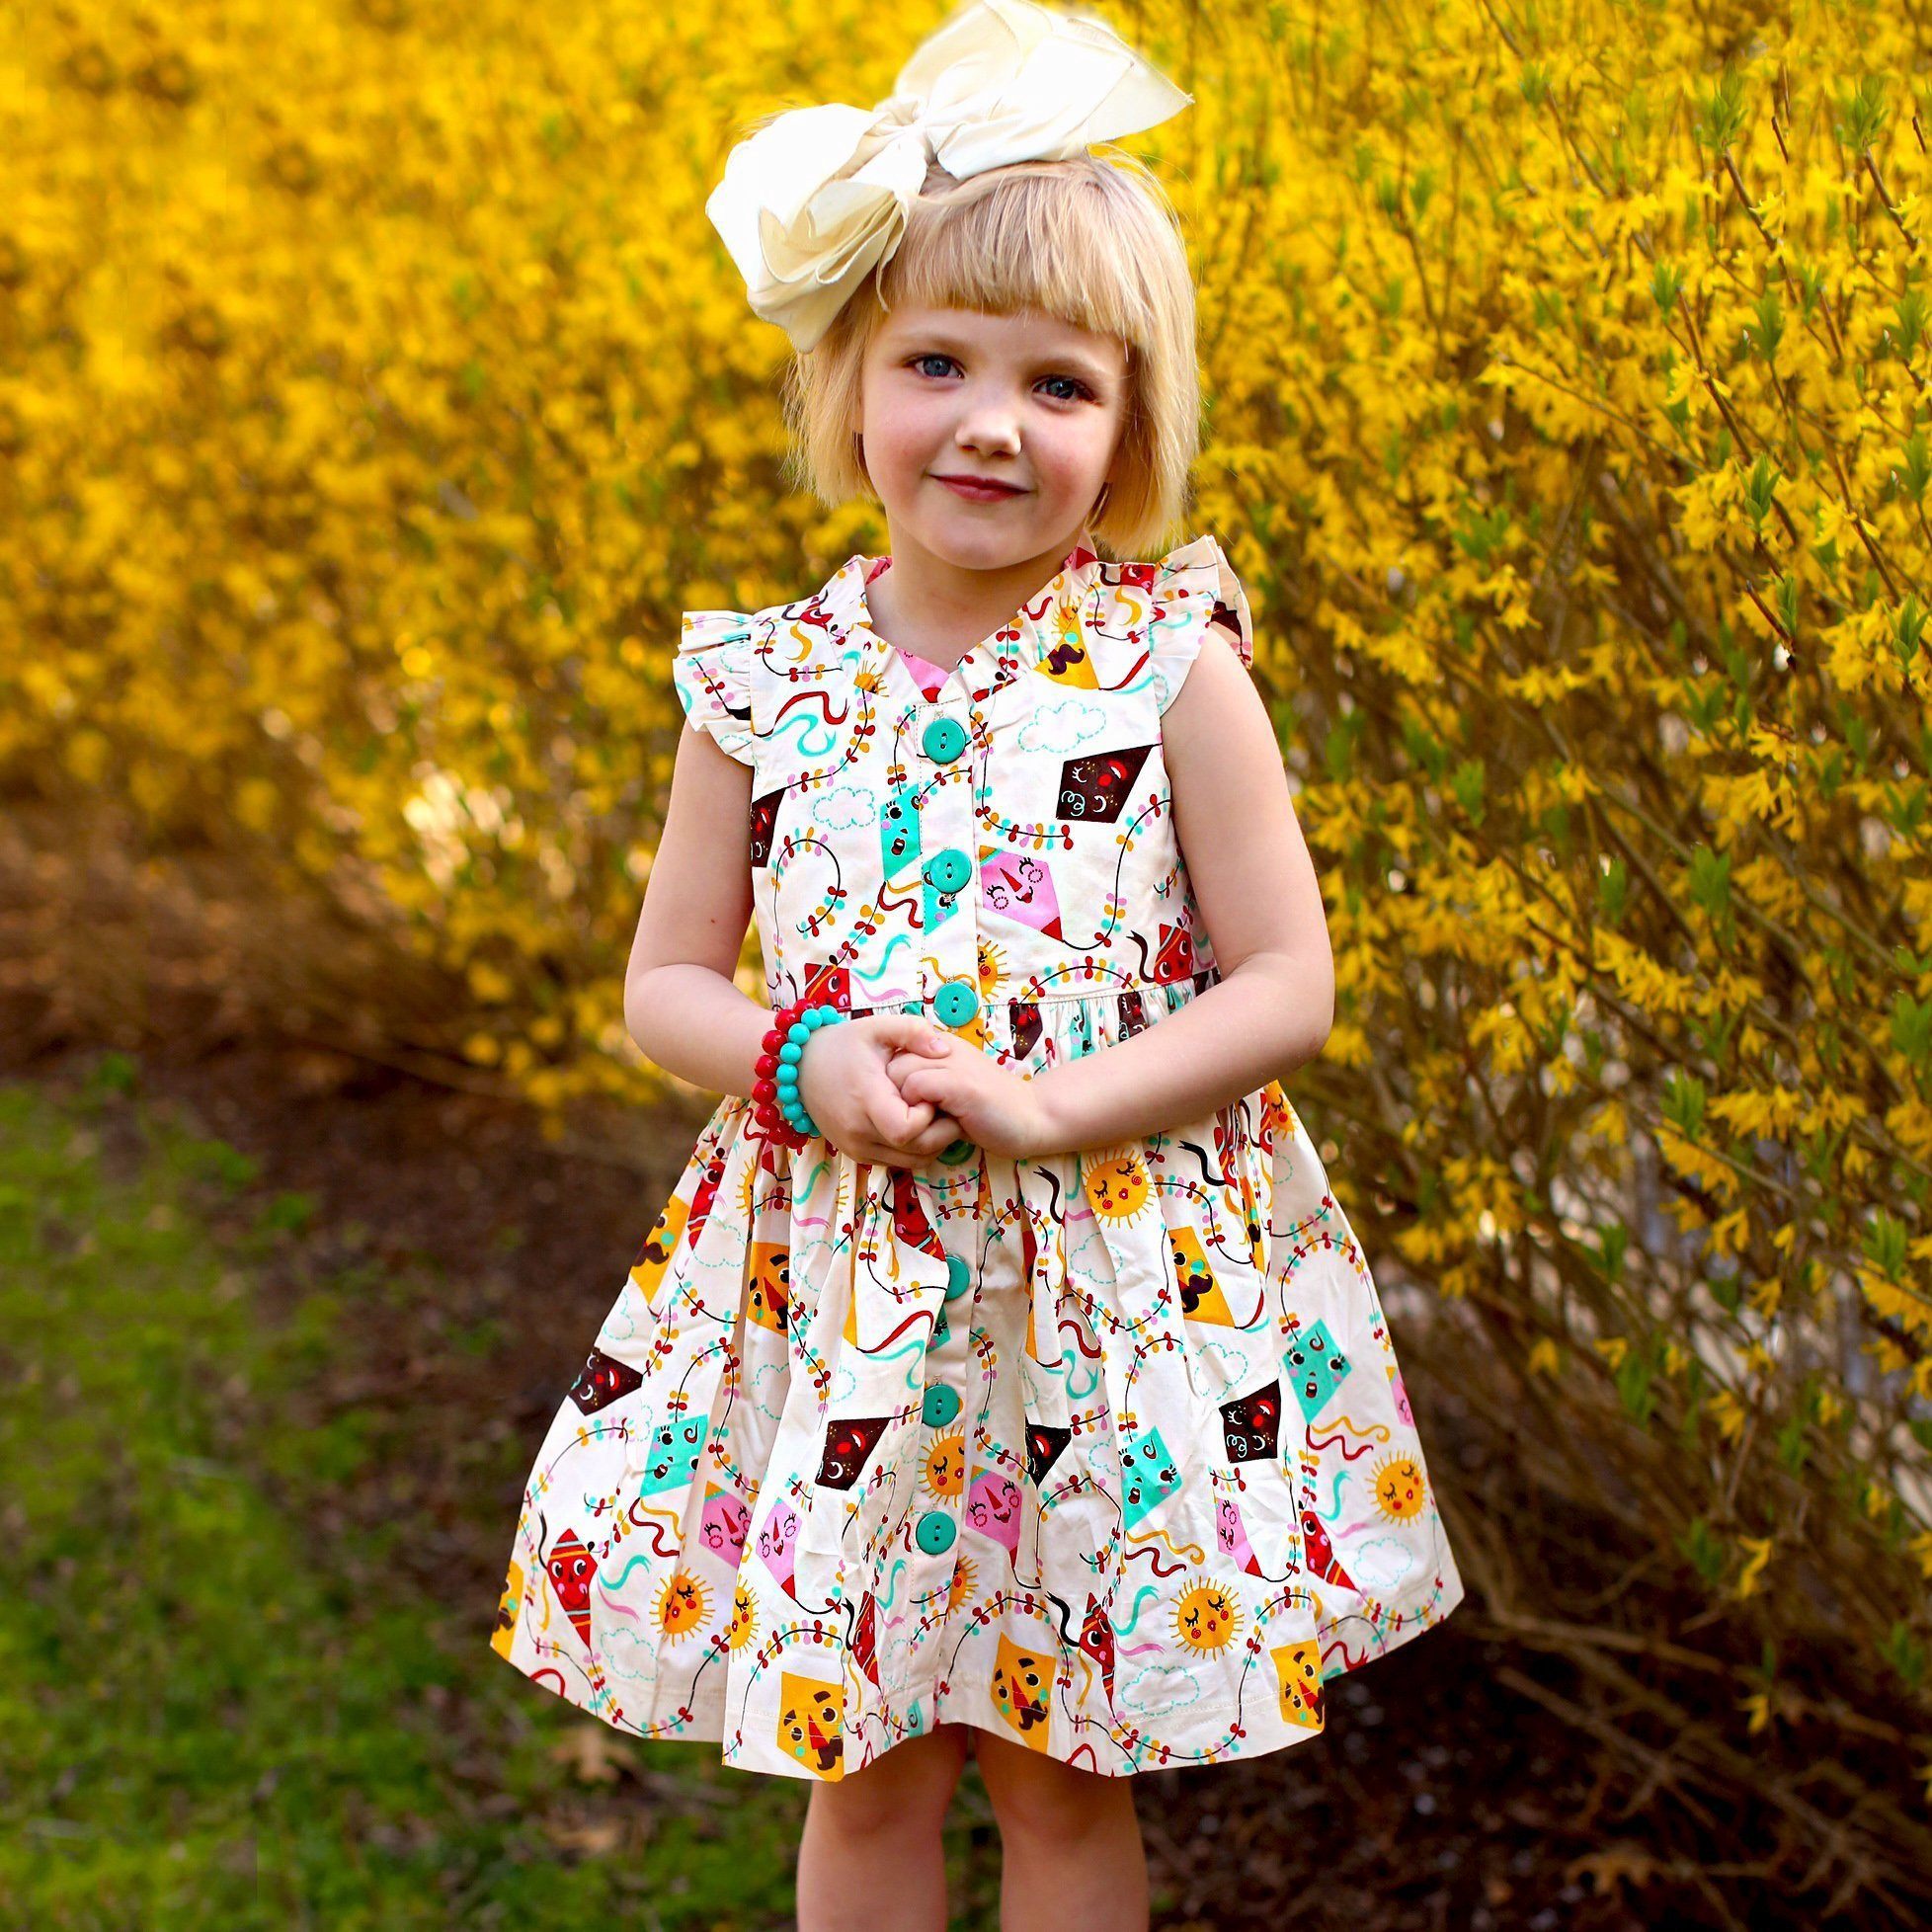 vintage inspired dress for toddlers retro clothing